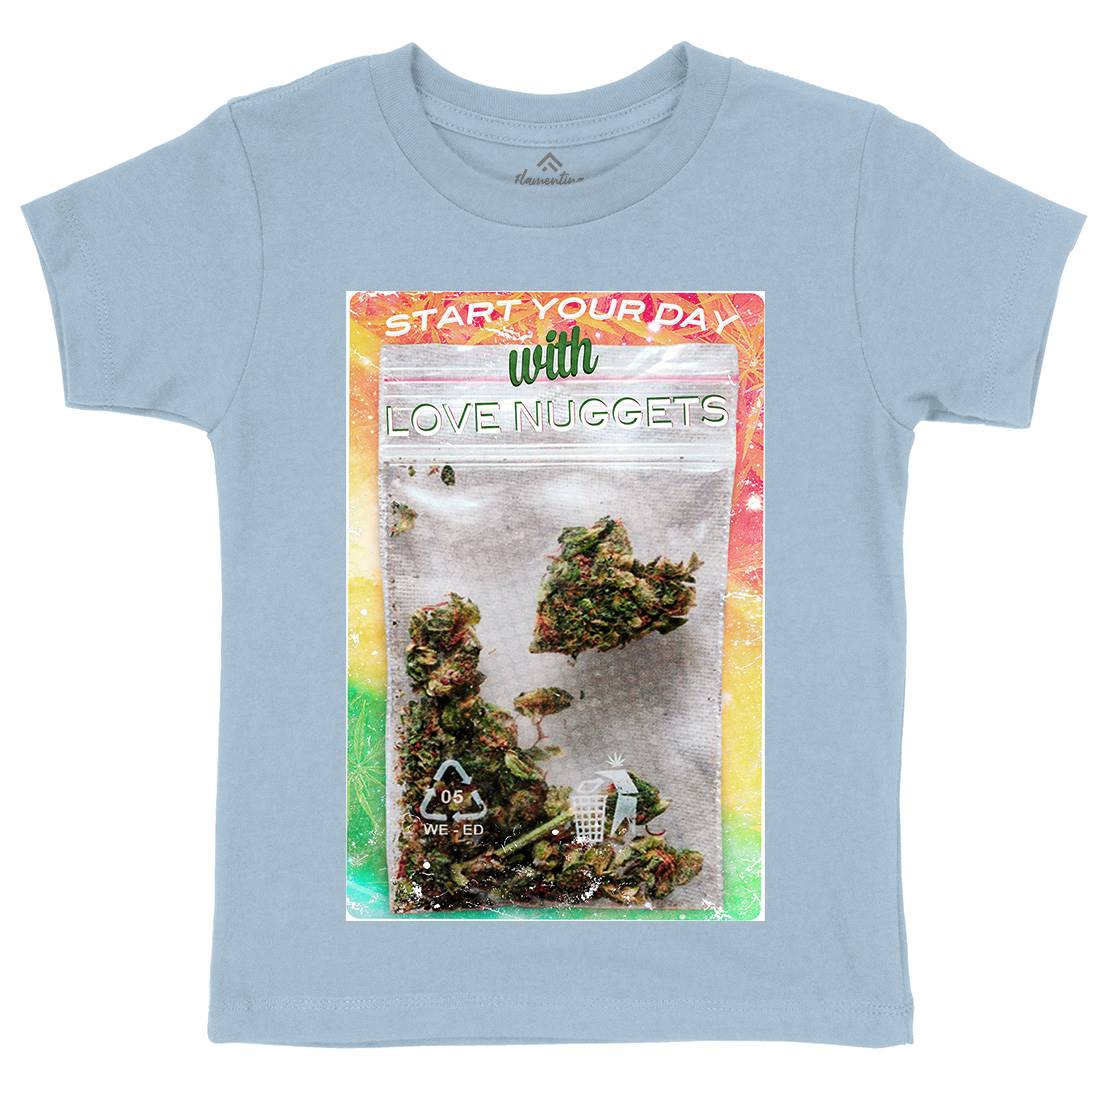 Love Nuggets Kids Crew Neck T-Shirt Drugs A871